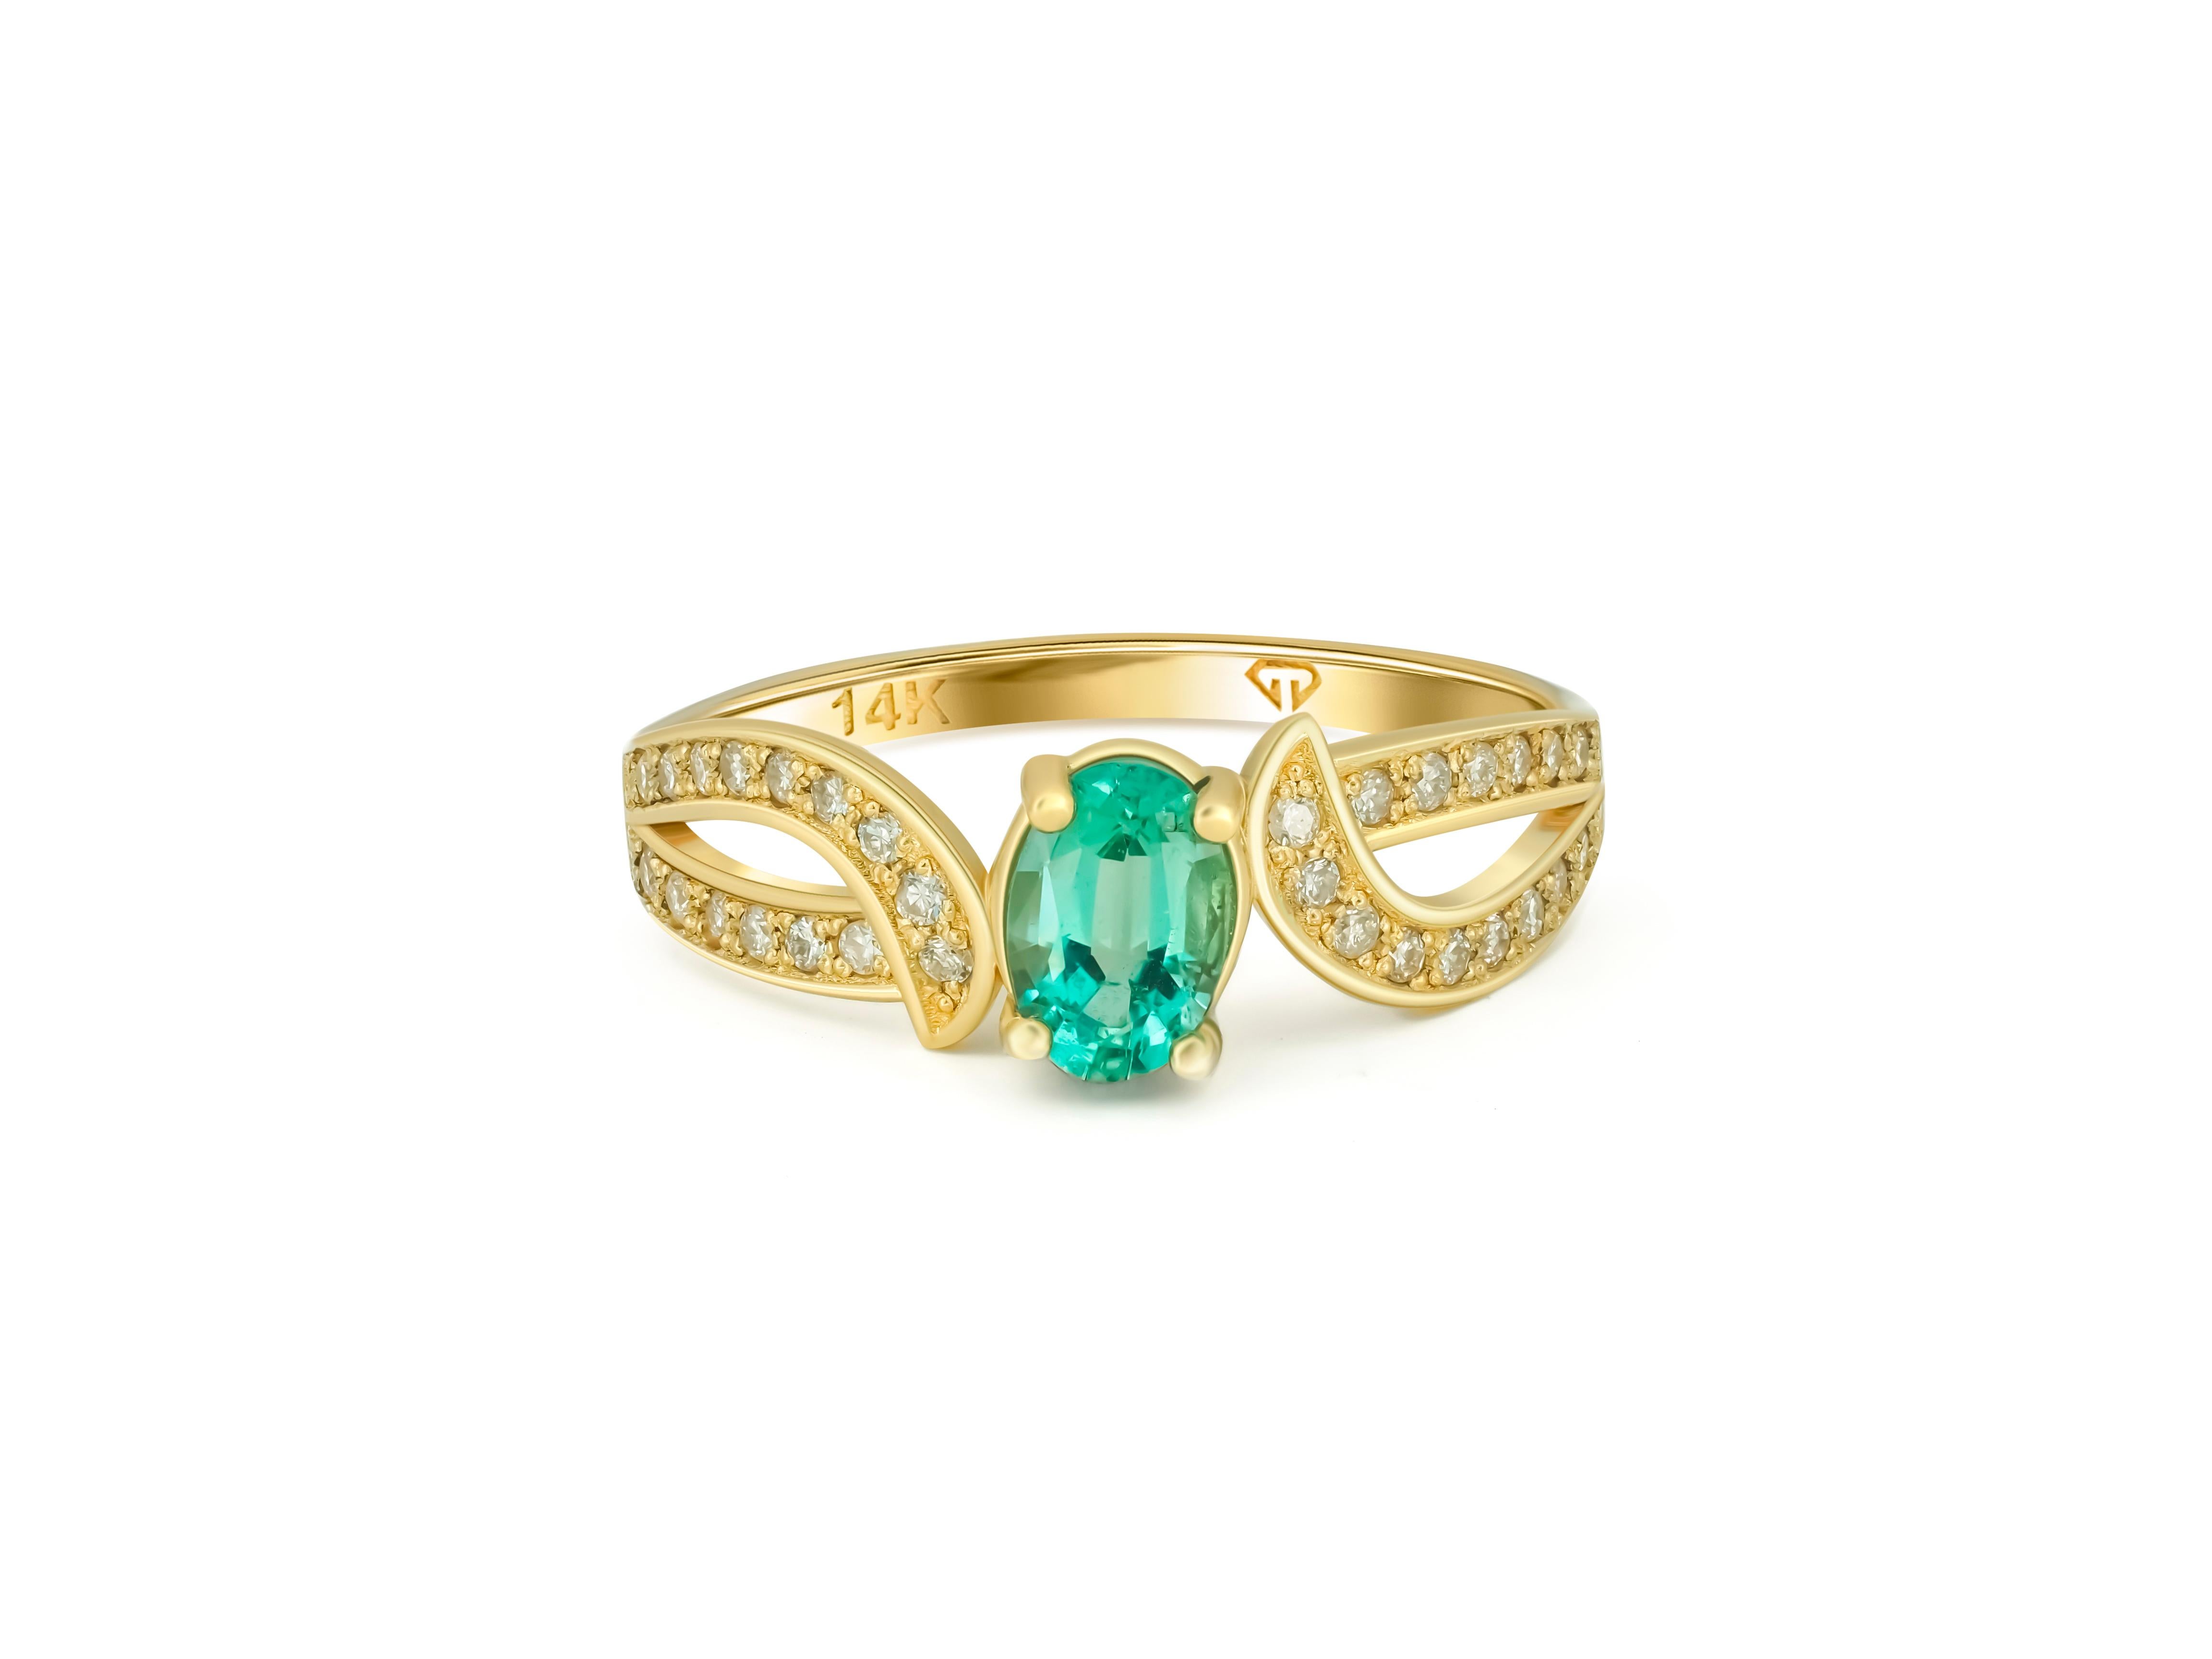 Genuine emerald 14k gold ring. 
Emerald engagement ring. Emerald vintage ring. Emerald gold ring. May birthstone ring. Oval emerald ring.

Metal: 14kt solid gold
Total weight: 2 gr (depends from size).

Central gemstone: natural emerald
Color: vivid